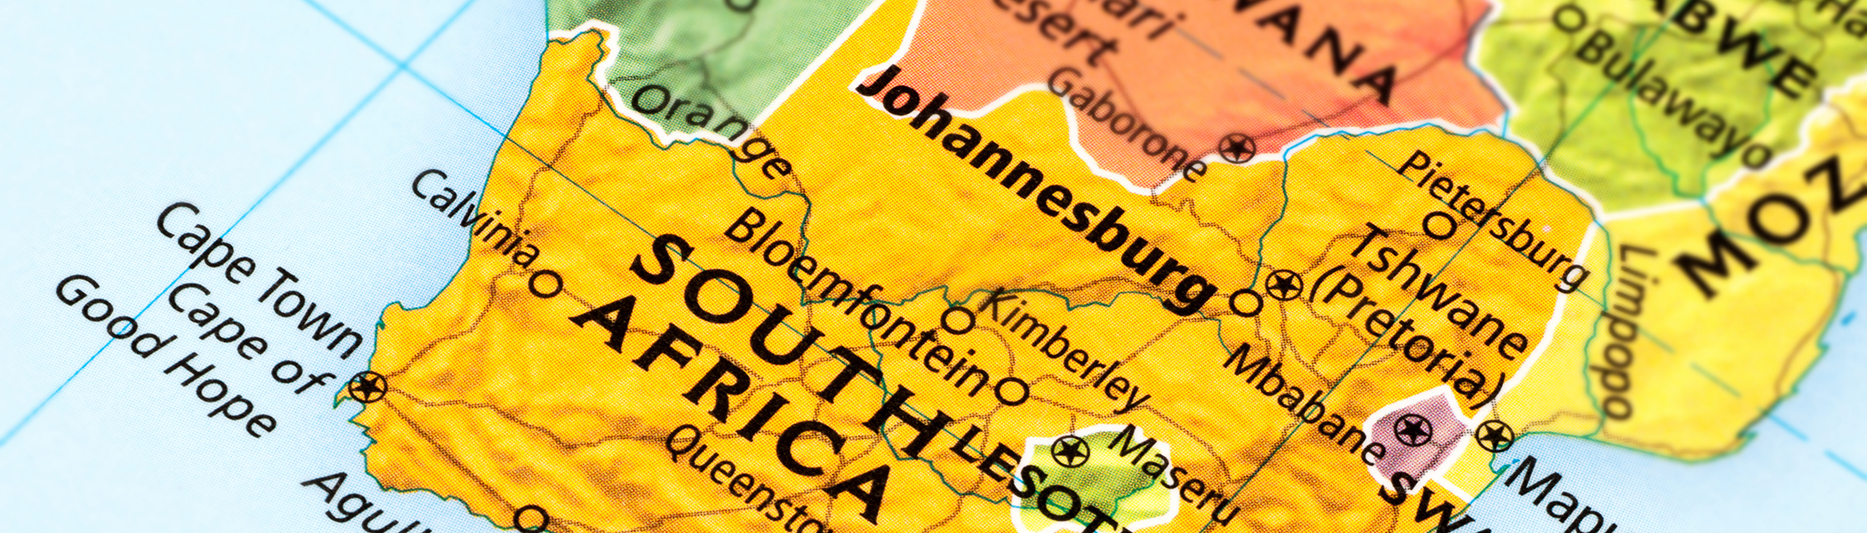 South Africa immigration 2021 outlook FAQ series (Part 1 of 4)